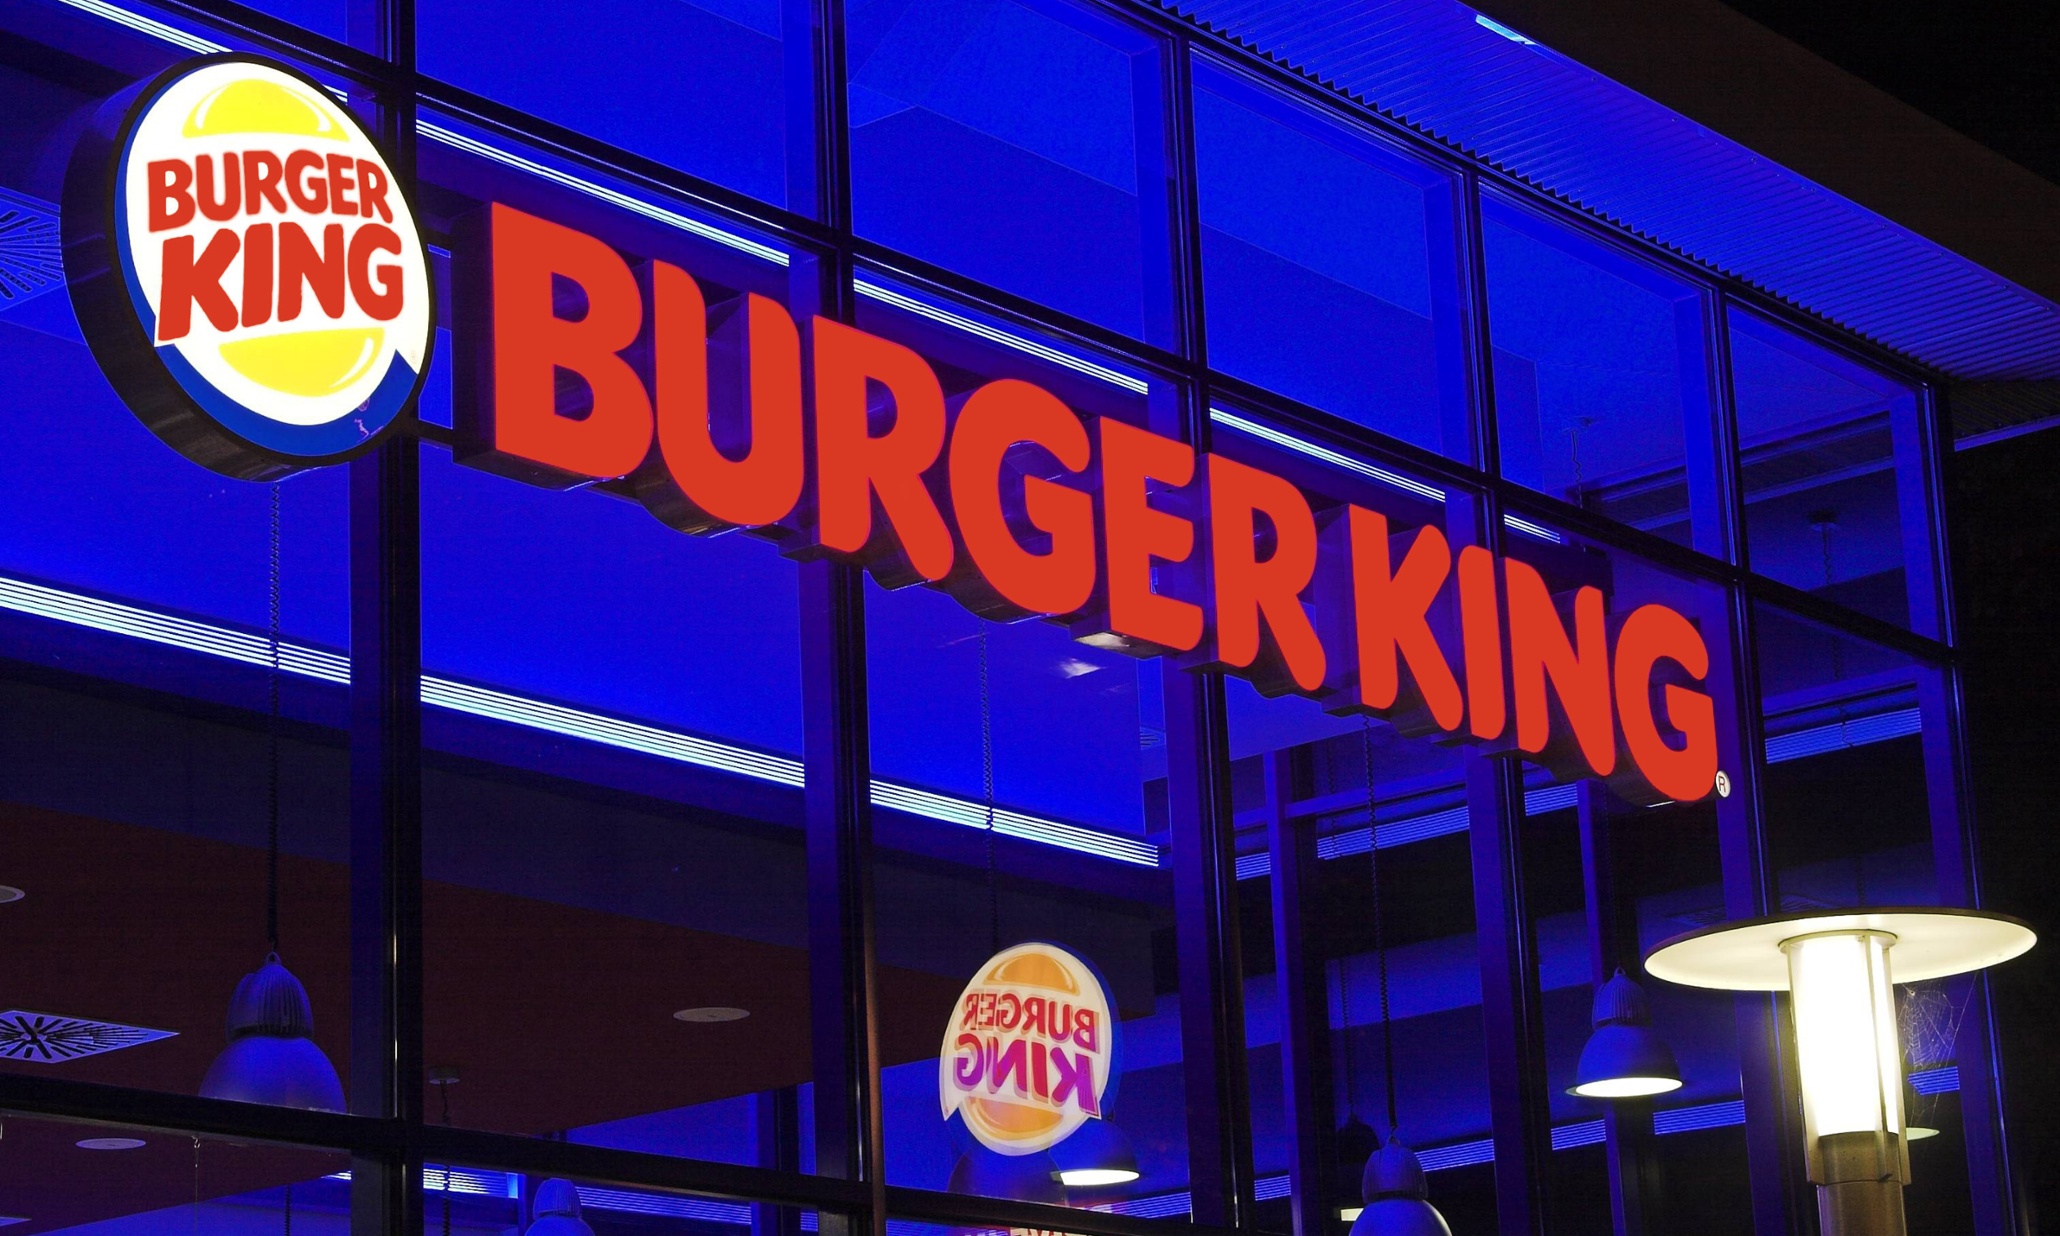 Burger King faces tax controversy after $11bn Tim Hortons purchase